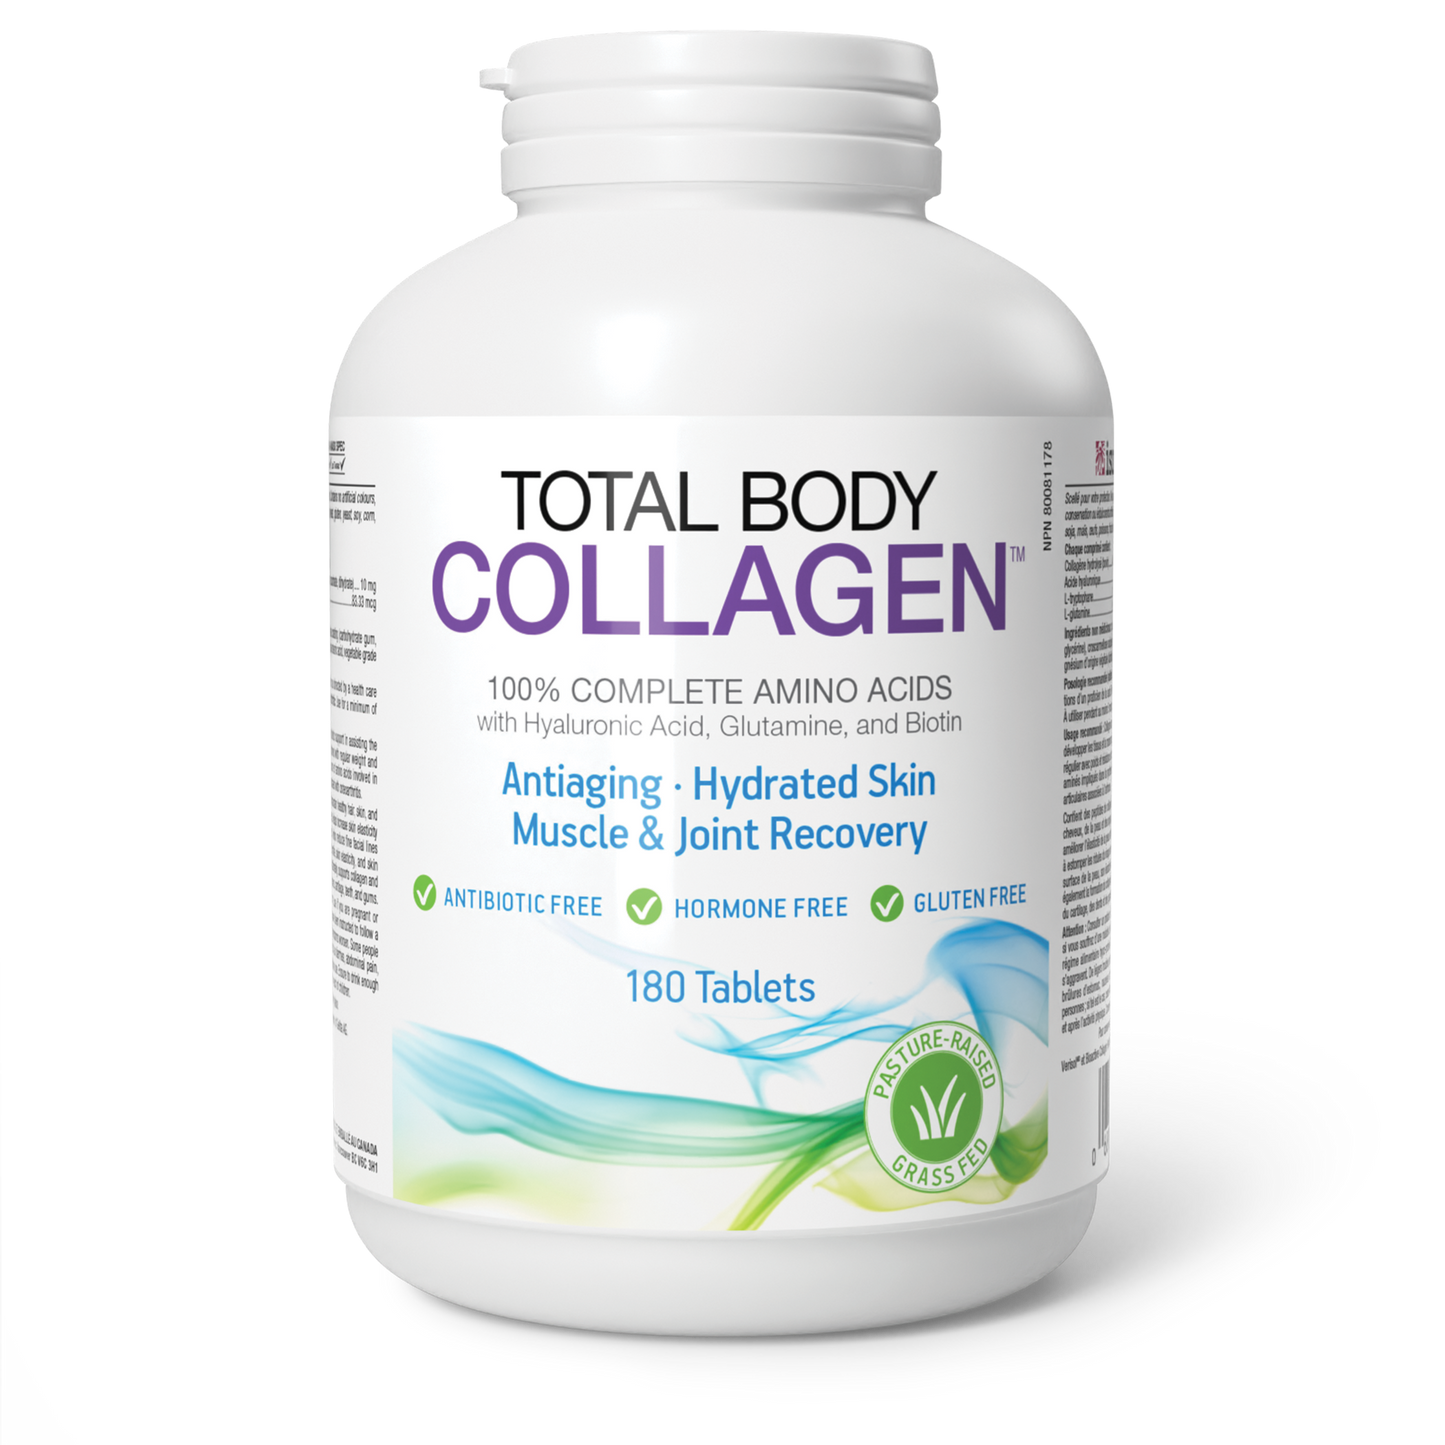 TOTAL BODY COLLAGEN 180 TABLETS